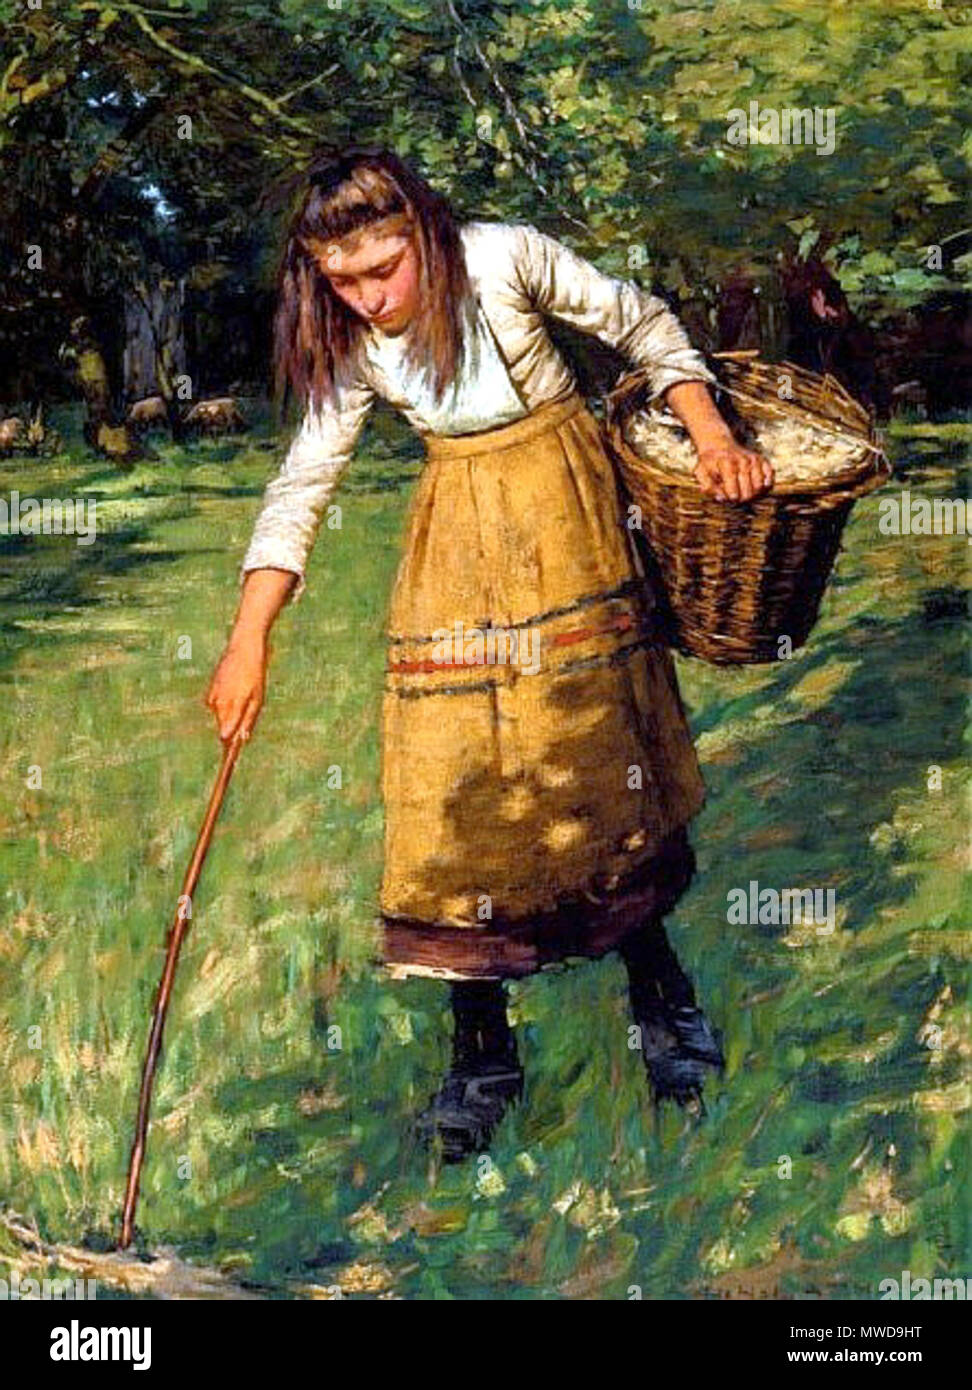 . Gathering Wool . Unknown date.    Henry Herbert La Thangue  (1859–1929)     Alternative names Henry Herbert LaThangue; Henry La Thangue; Henry Herbert la Thangue; Henry Herbert Lathangue; La Thangue  Description English painter Realist painter and associated with the Newlyn School  Date of birth/death 19 September 1859 21 December 1929  Location of birth/death London London  Work location Bretagne, London, Category:Norfolk  Authority control  : Q1606851 VIAF: 25469415 ISNI: 0000 0000 6681 1384 ULAN: 500004645 LCCN: n89654016 WGA: LA THANGUE, Henry Herbert WorldCat 273 Henry Herbert La Thangu Stock Photo